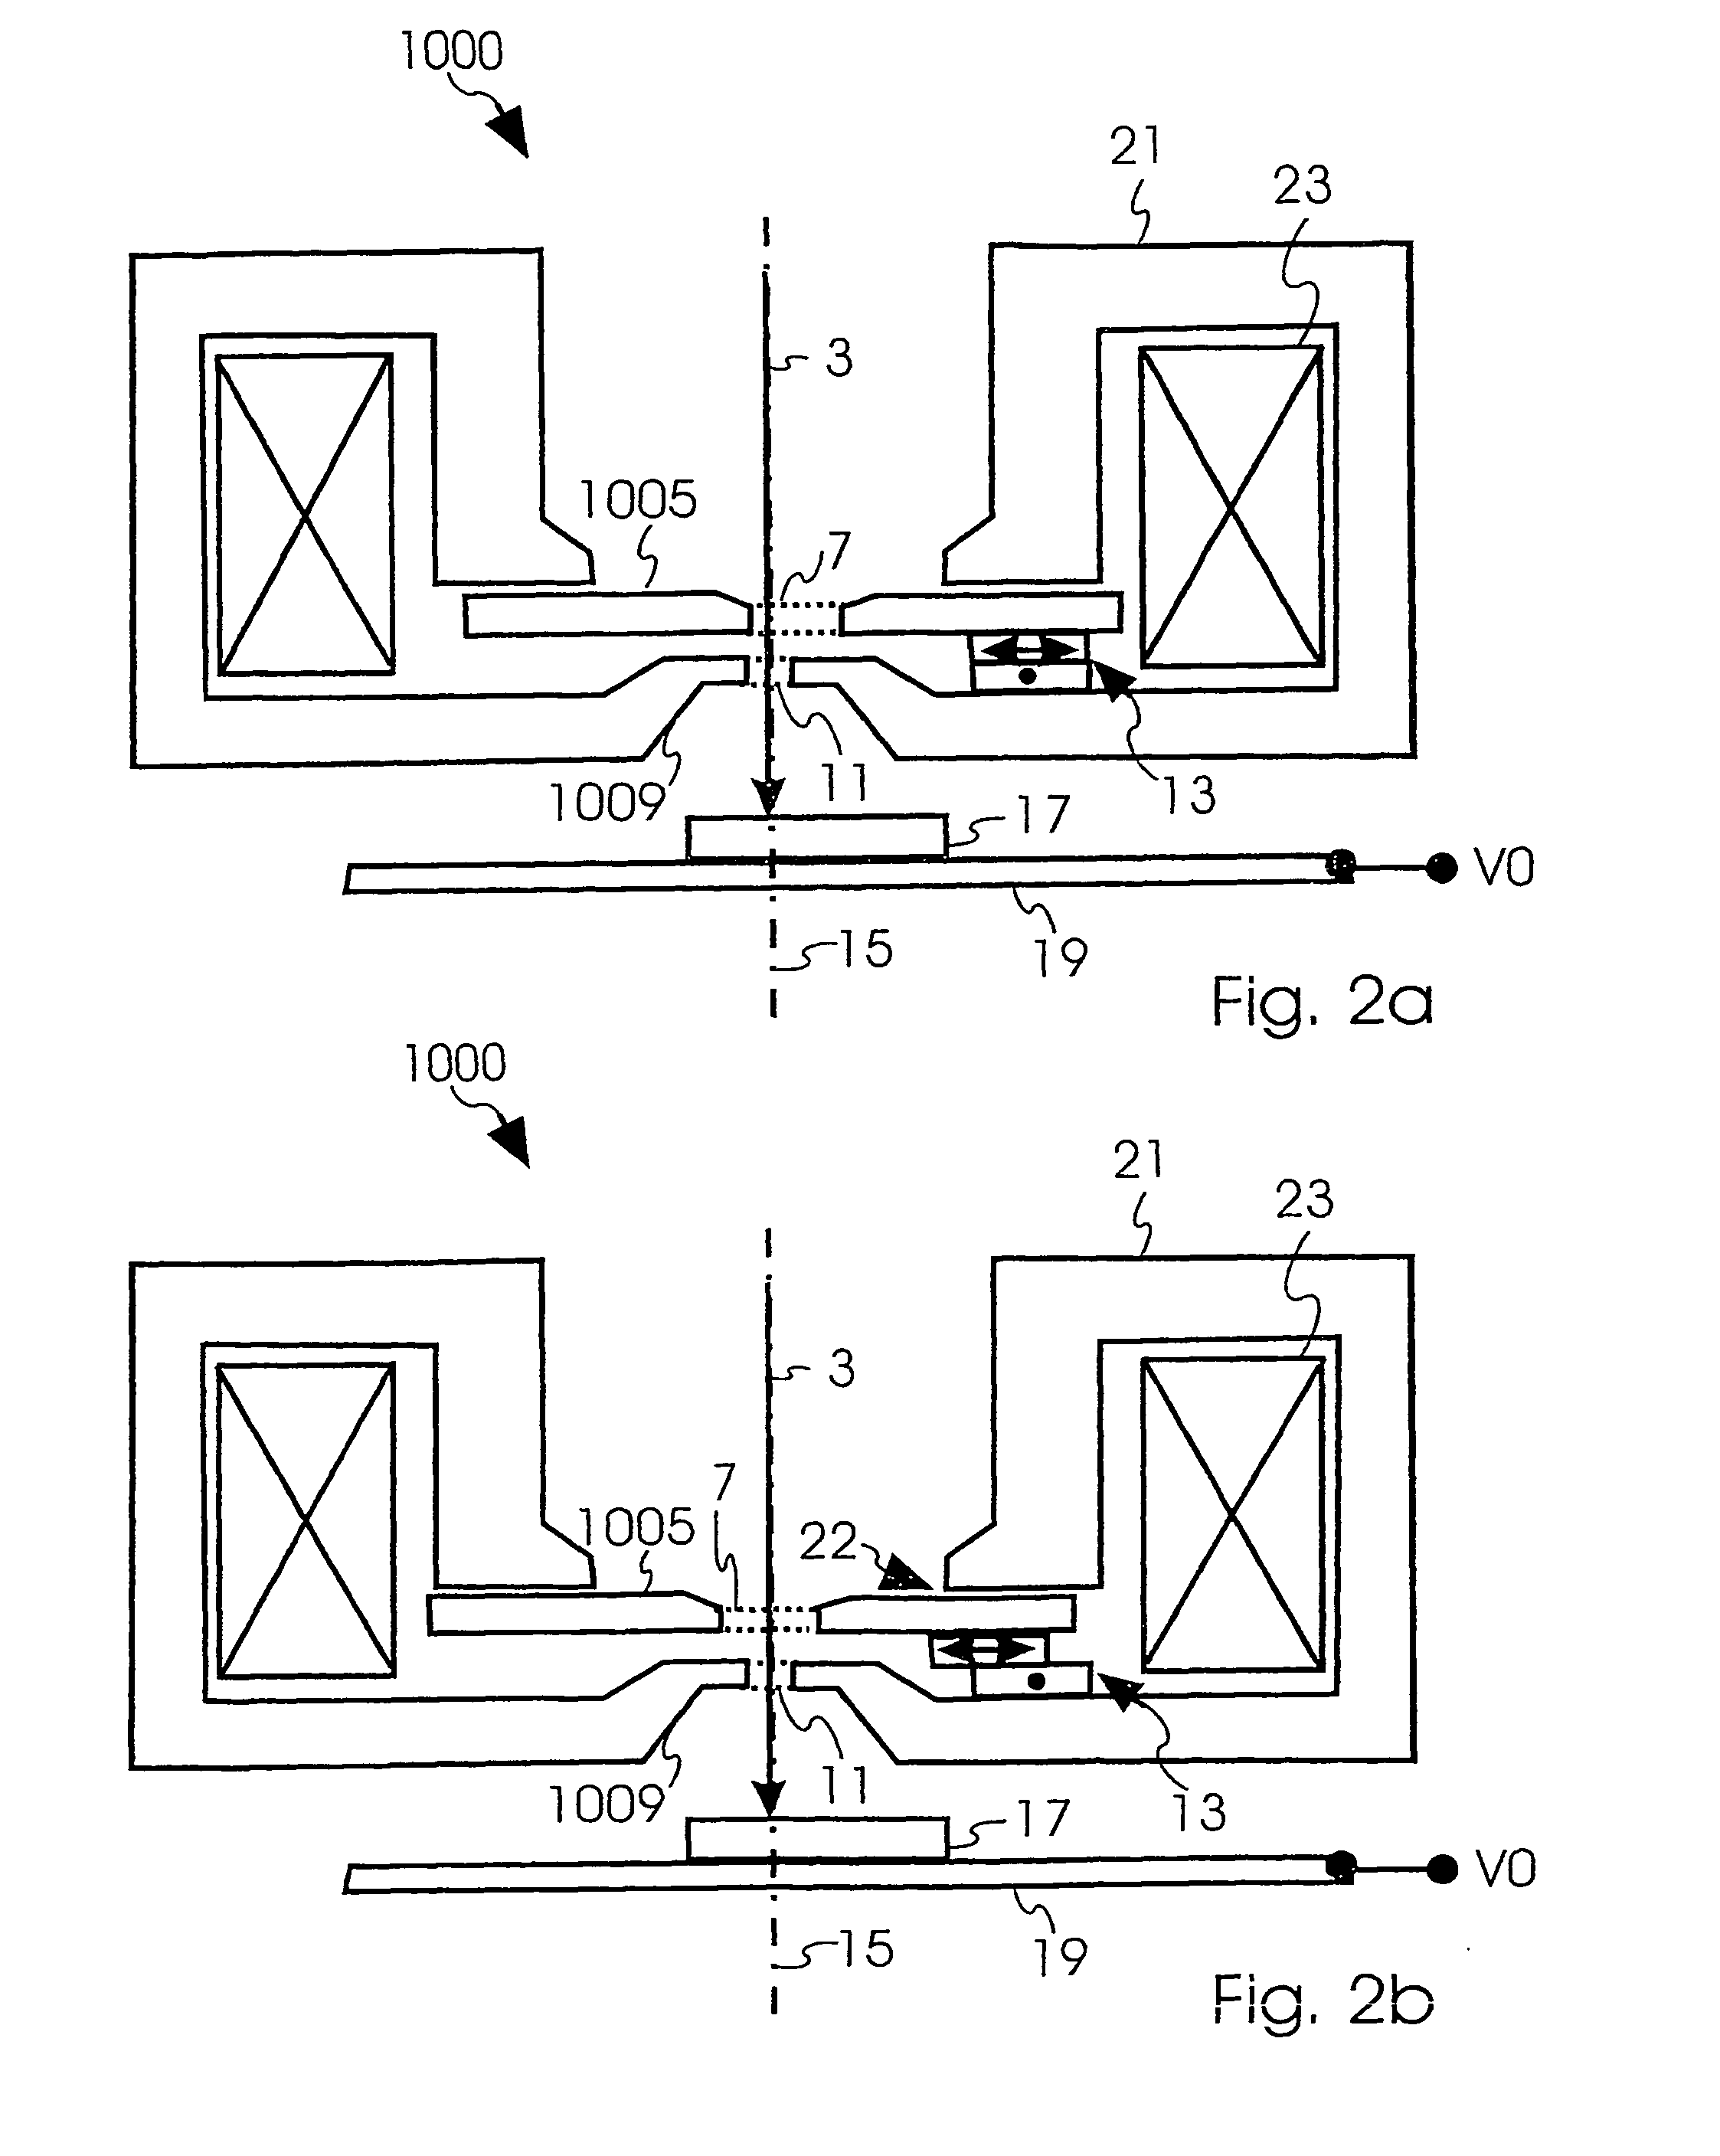 Beam Optical Component Having a Charged Particle Lens